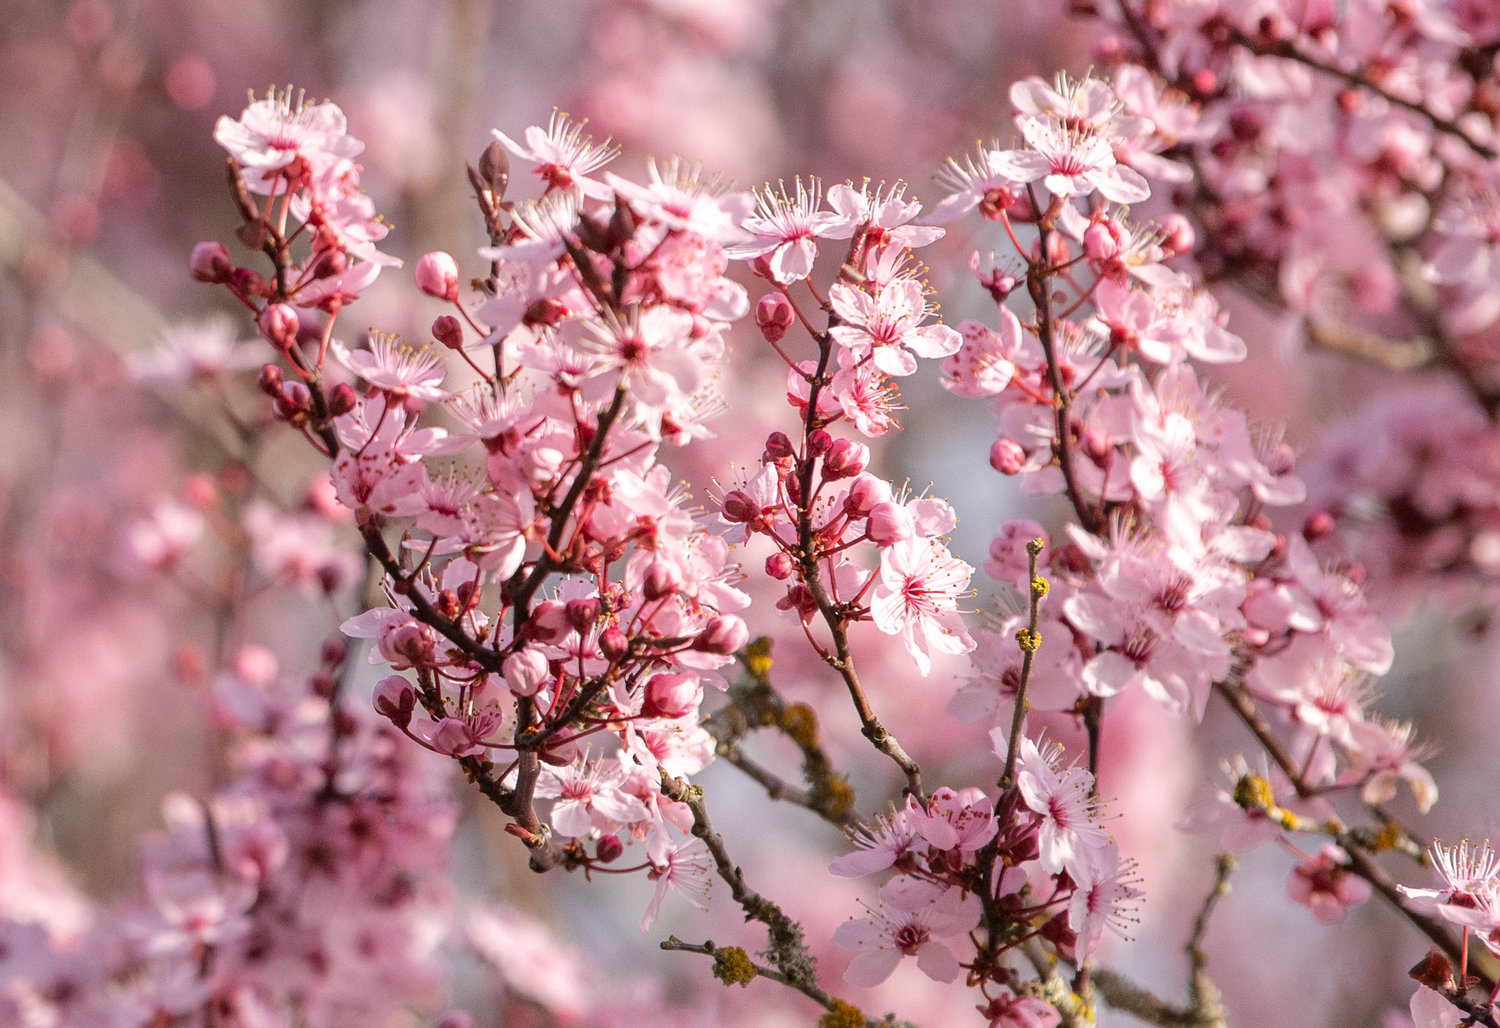 Pink blossoms sway in the breeze in downtown Centralia on Wednesday afternoon in the sun.